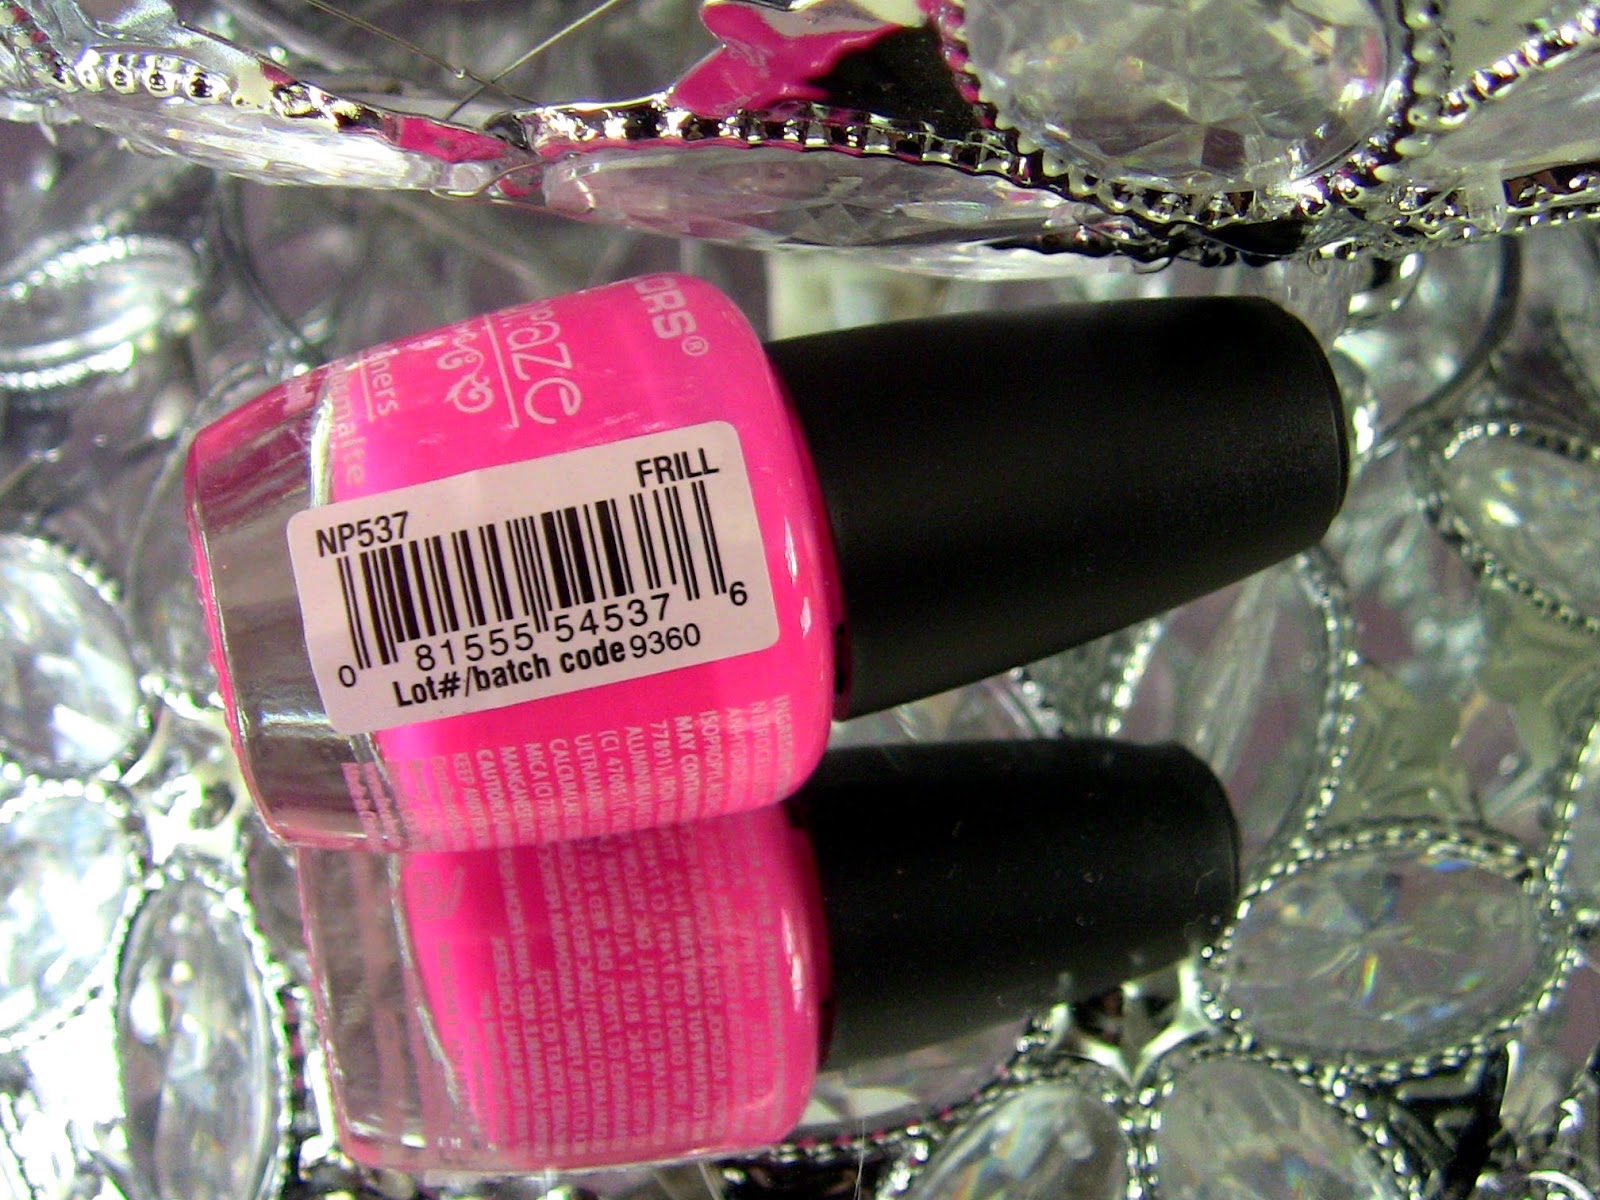 L.A. Colors Nail Frill Kit - wide 8